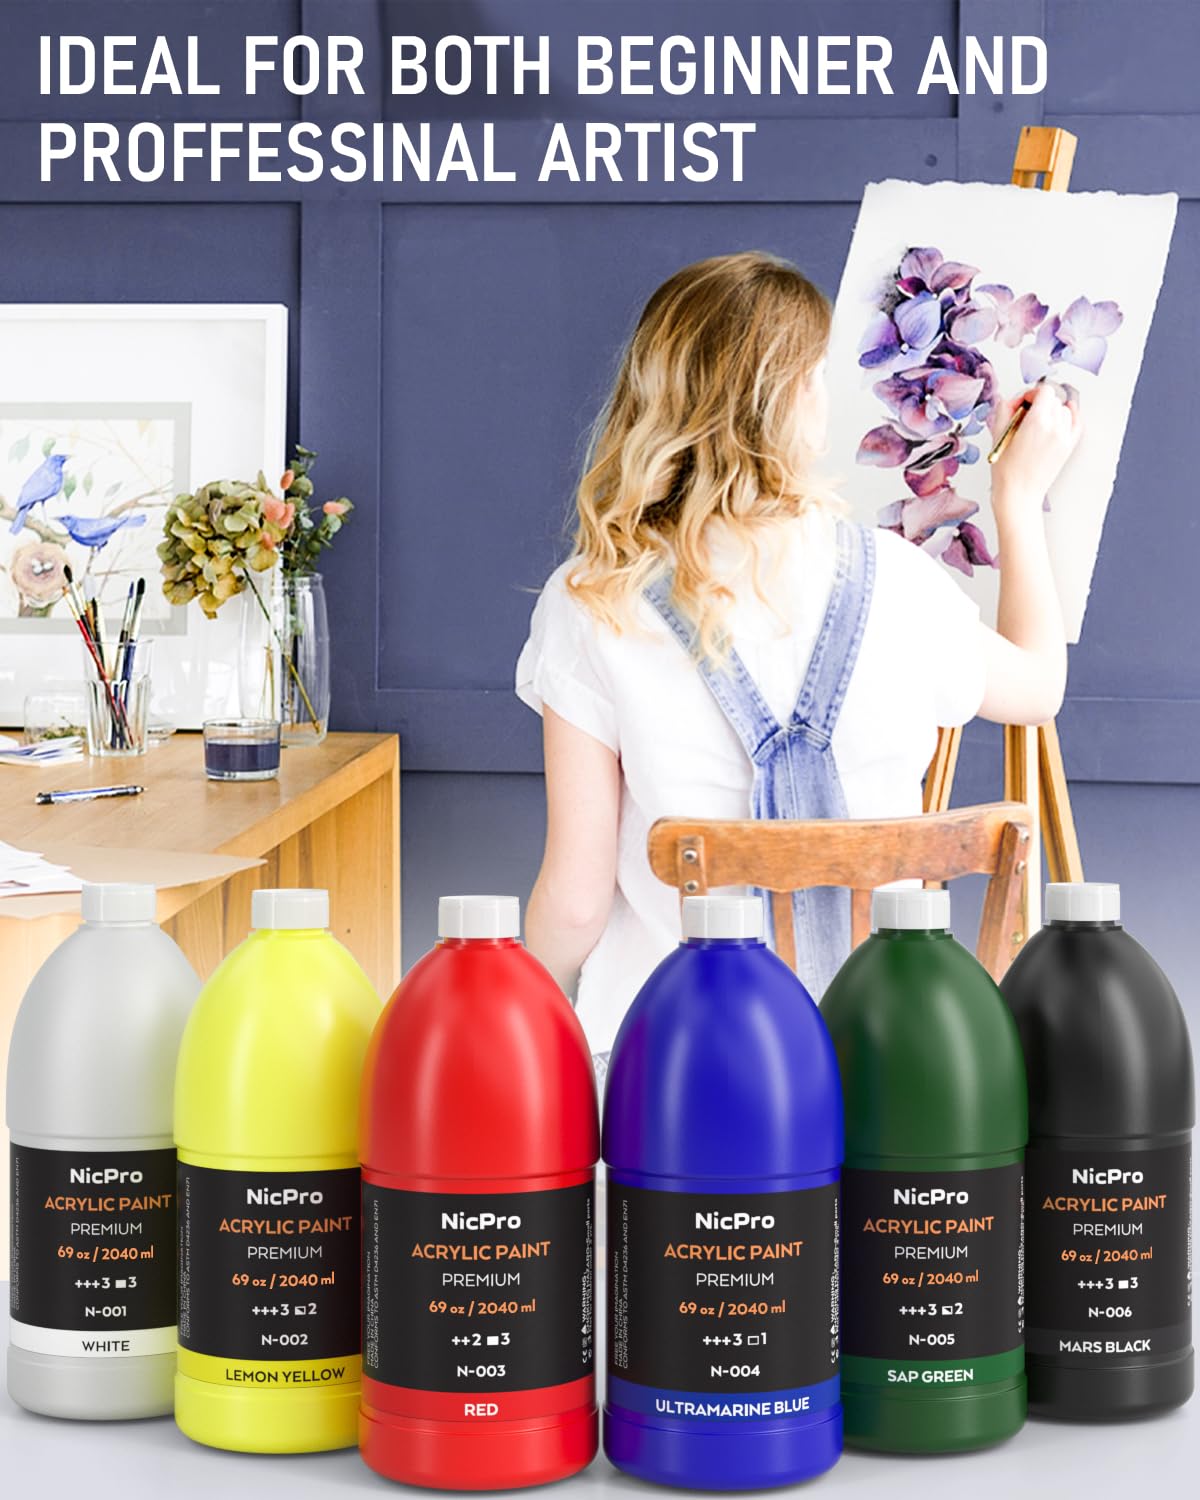 Nicpro 6 Colors Large Bulk Acrylic Paint Set (69 oz, 2040ml) Rich Art Painting Supplies Non Toxic for Multi Surface, Canvas, Wood, Leather, Fabric Stone Craft, for Kid & Adult with Pump, Color wheel